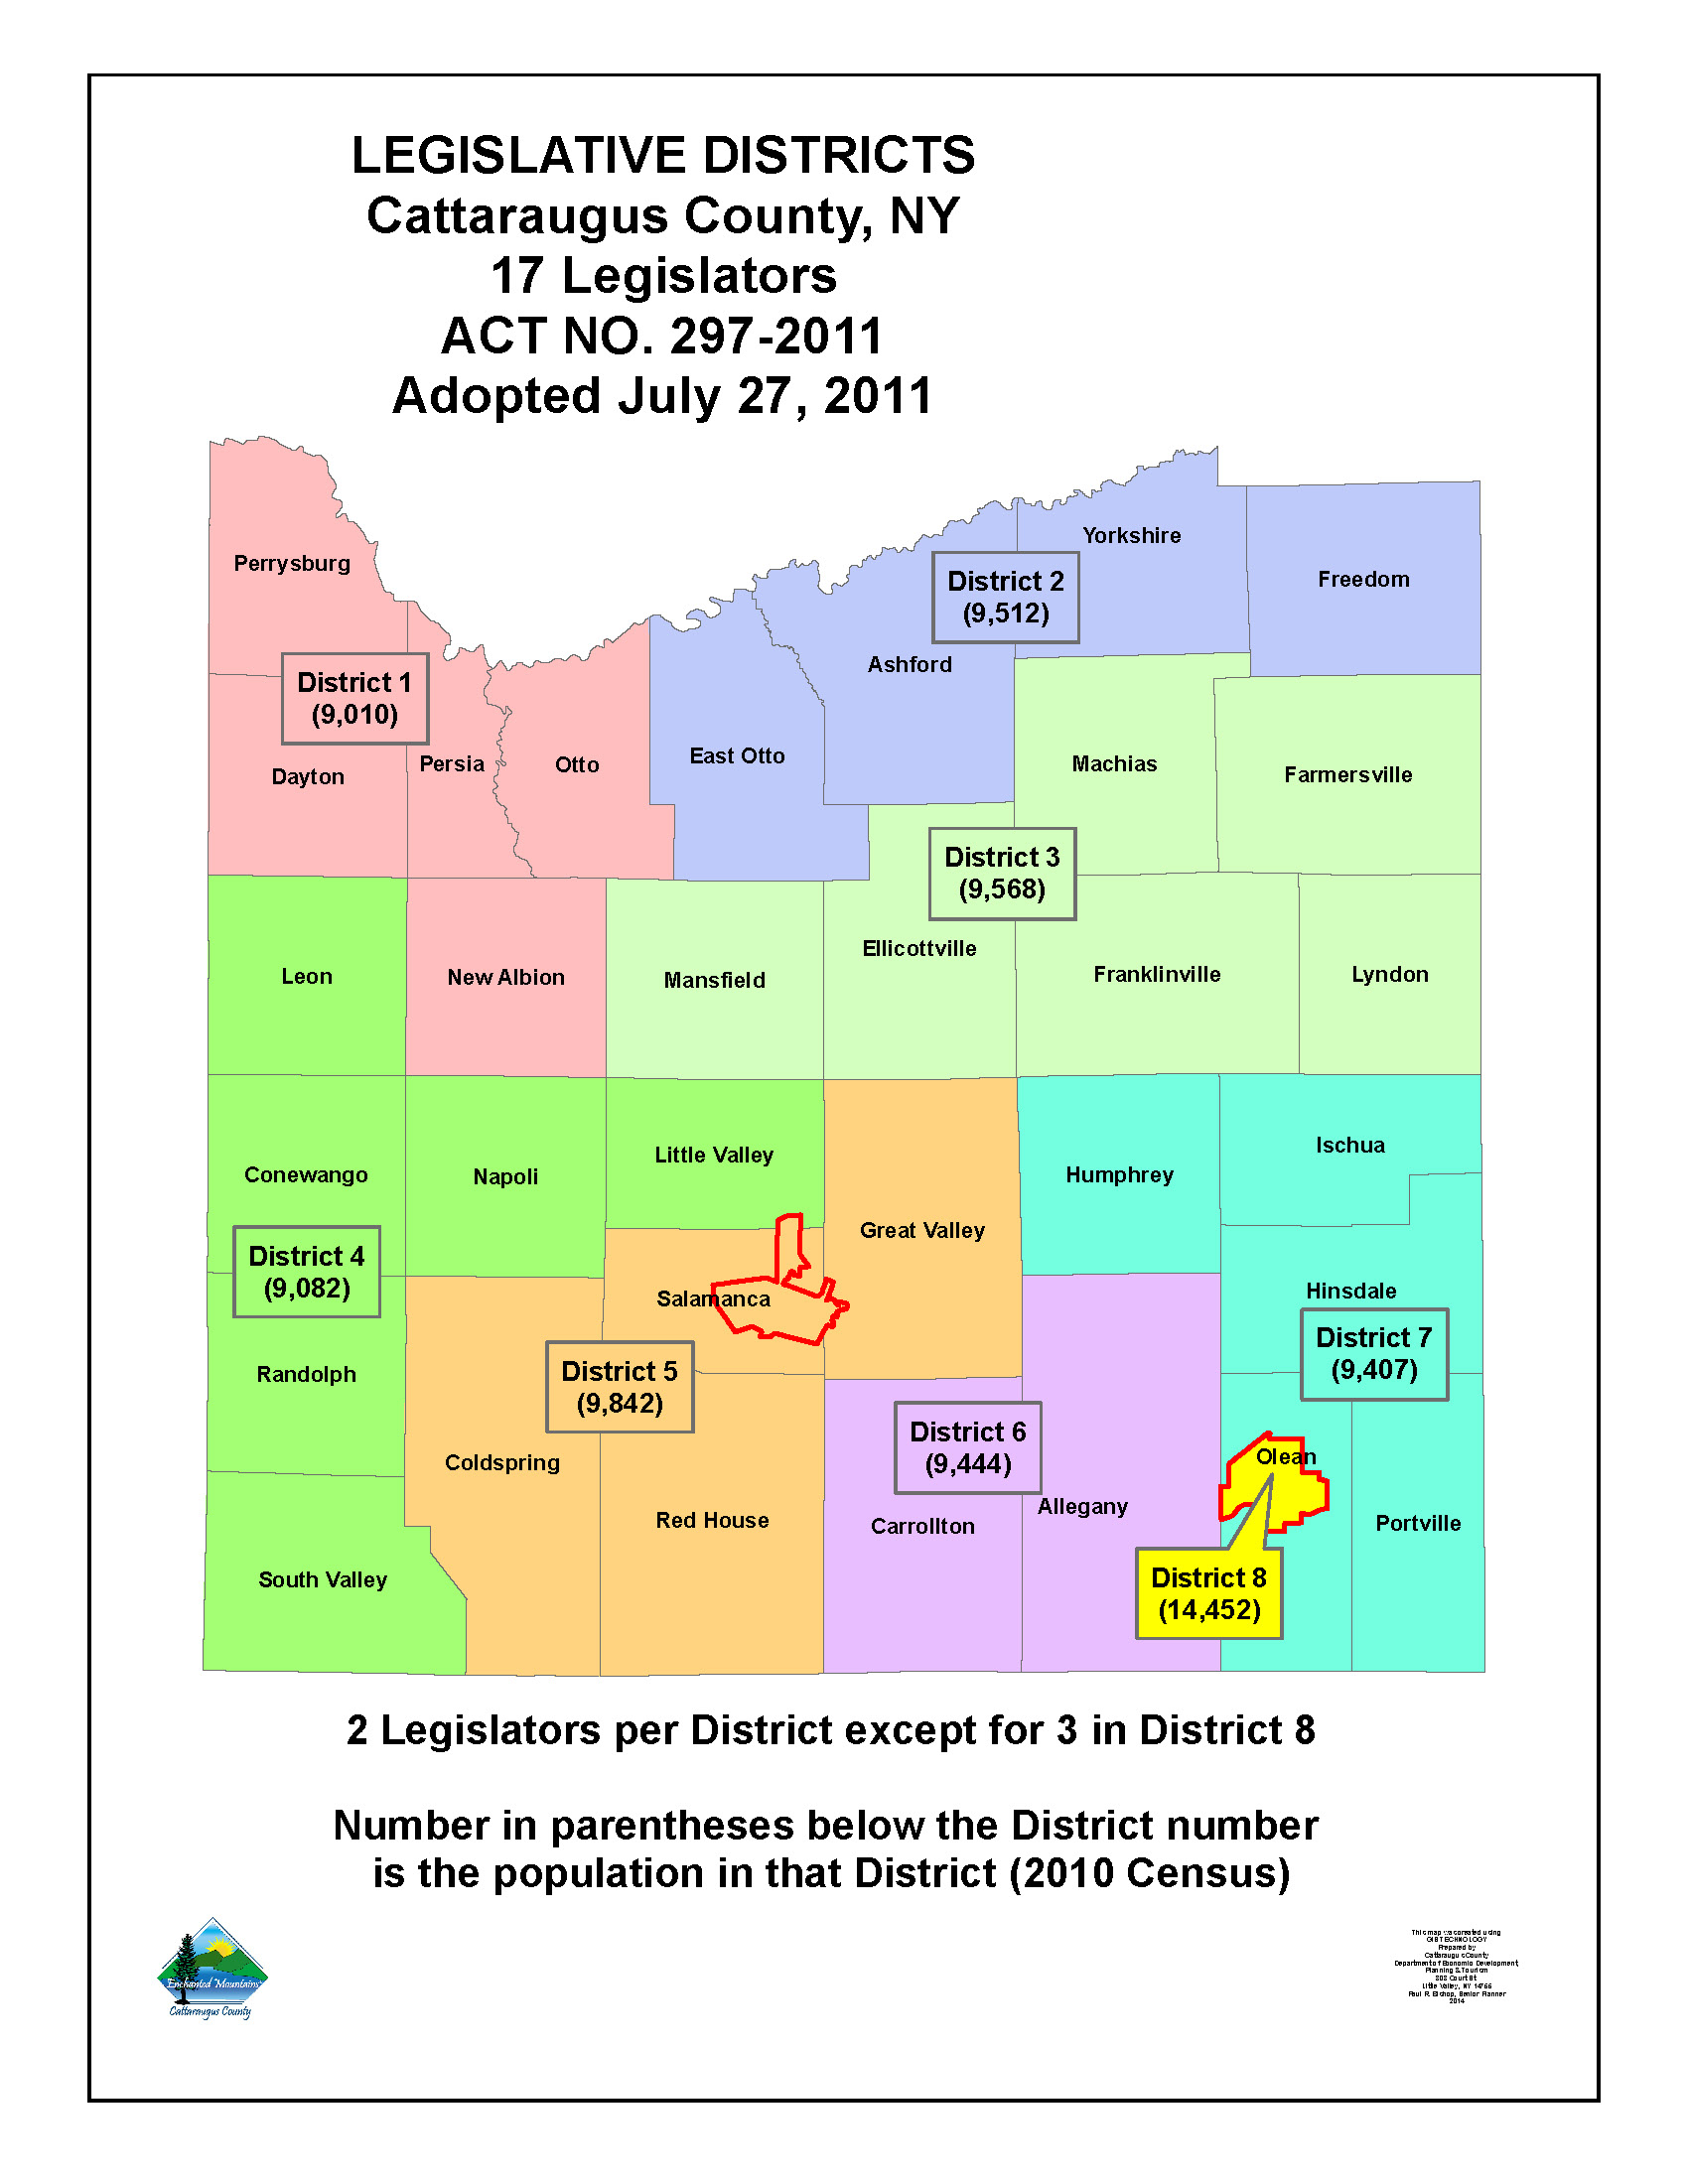 Map of 8 Legislative Districts in Cattaraugus County, New York to come into effect on January 1, 2016